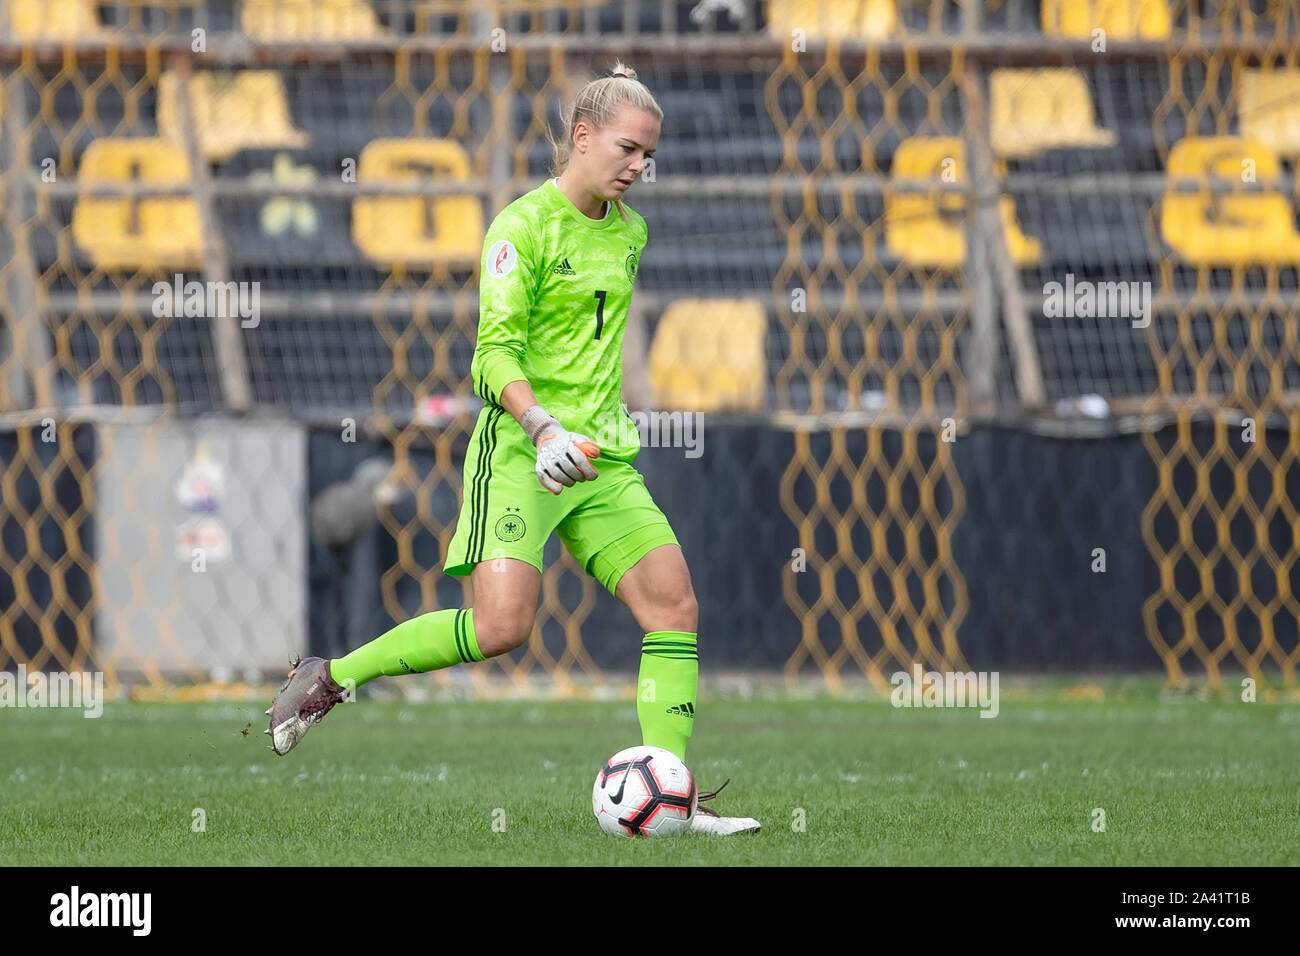 Thessaloniki, Greece October 08, 2019: Merle Frohms from Germany in action during the UEFA Women's European Championship 2021 qualifier match between Stock Photo